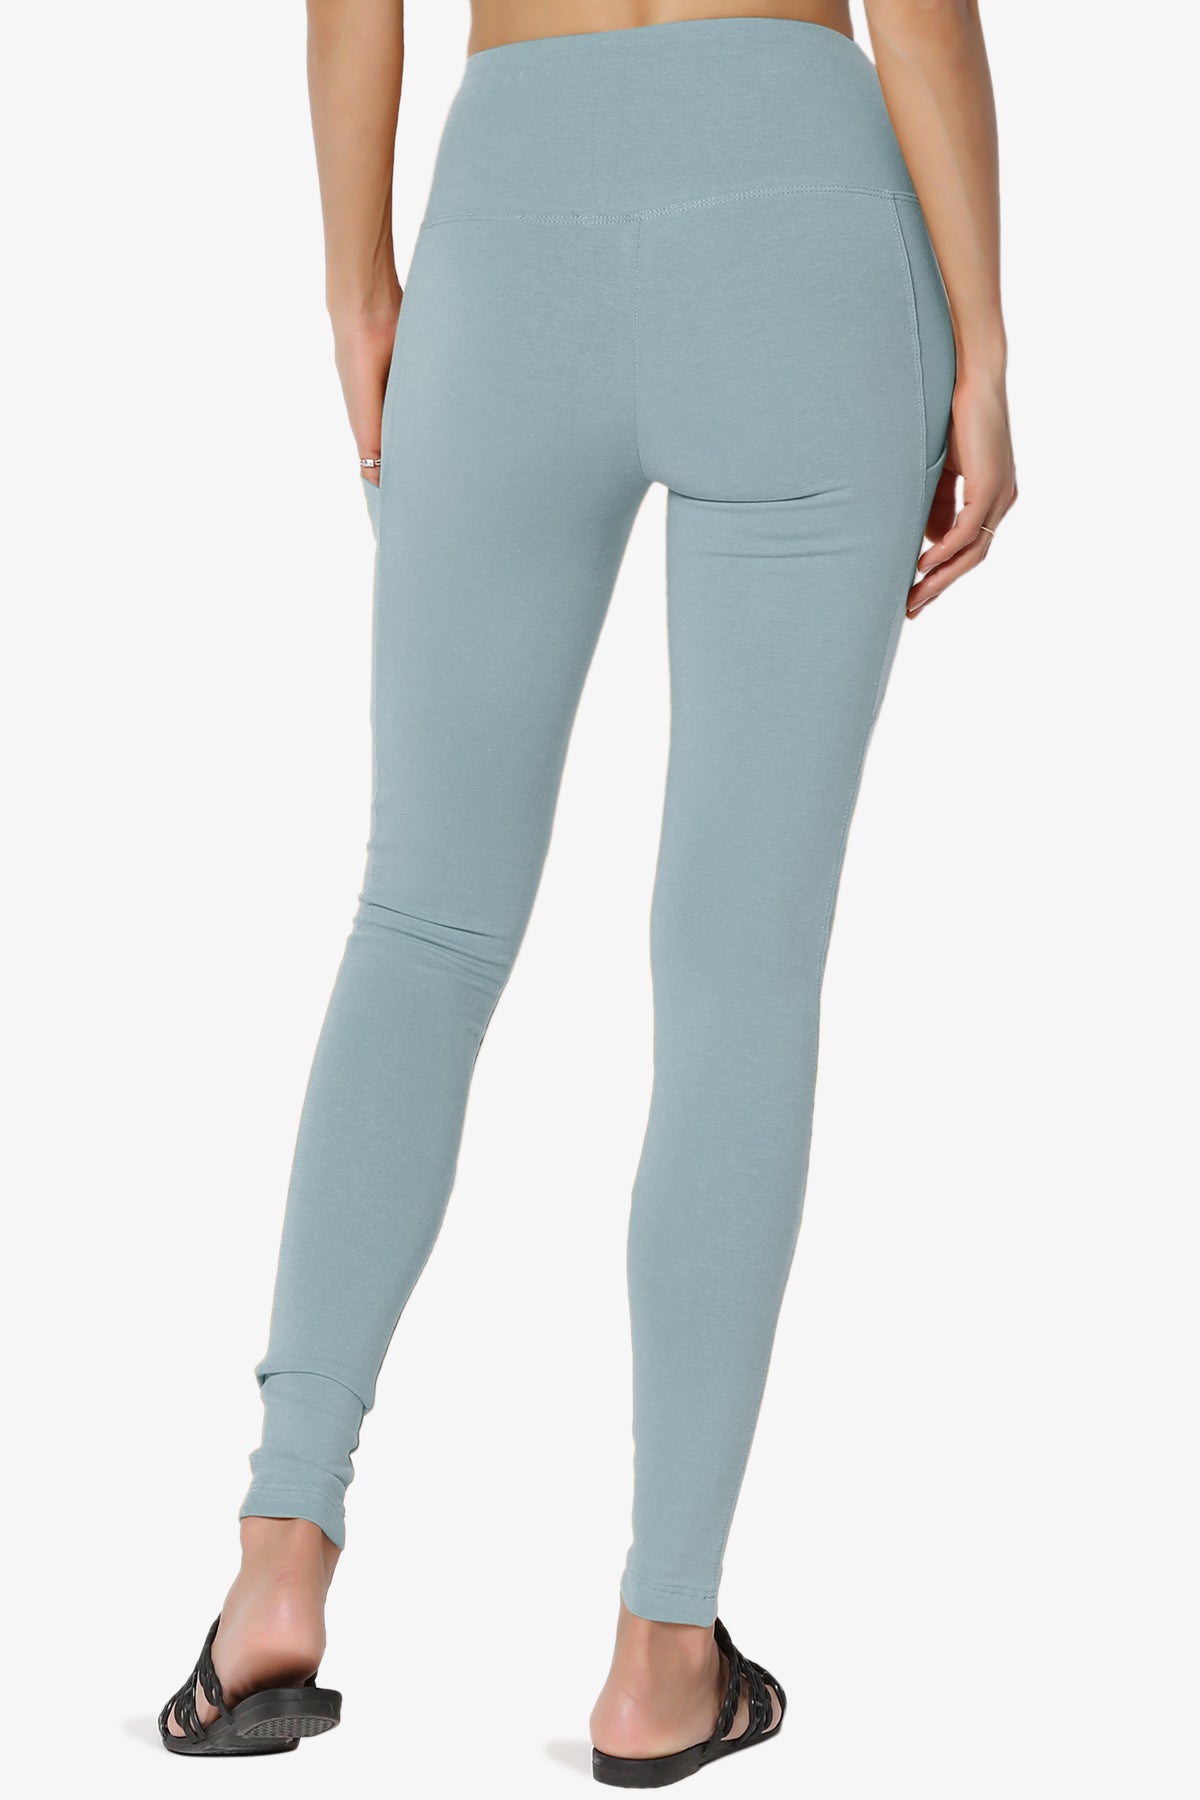 Ansley Luxe Cotton Leggings with Pockets DUSTY BLUE_2